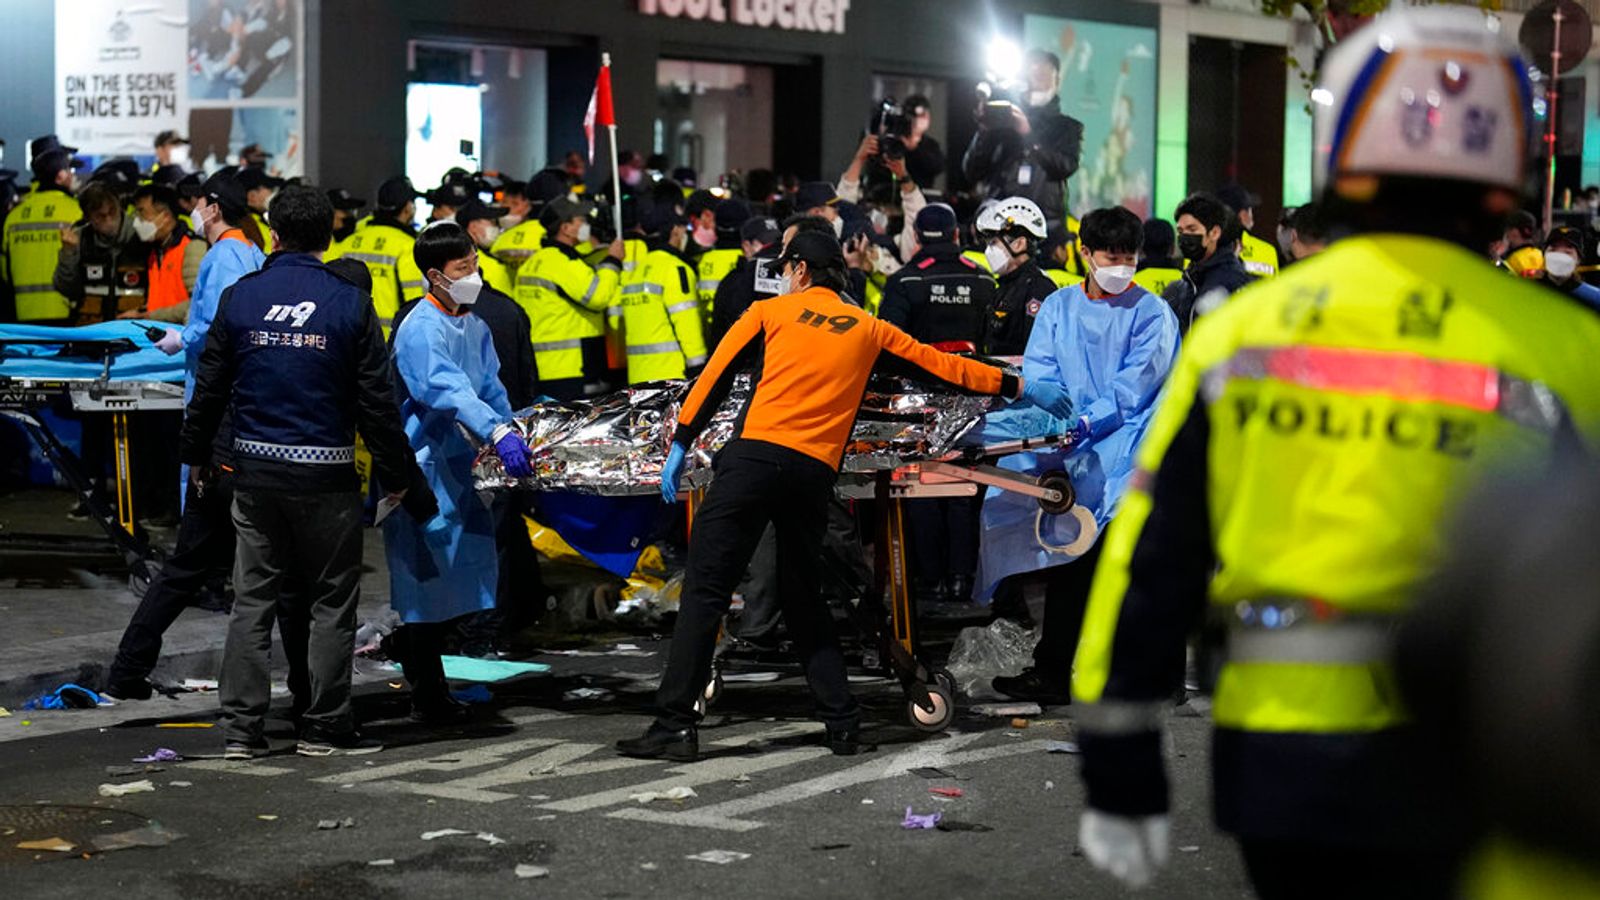 South Korea declares national period of mourning after Halloween crowd crush kills 151